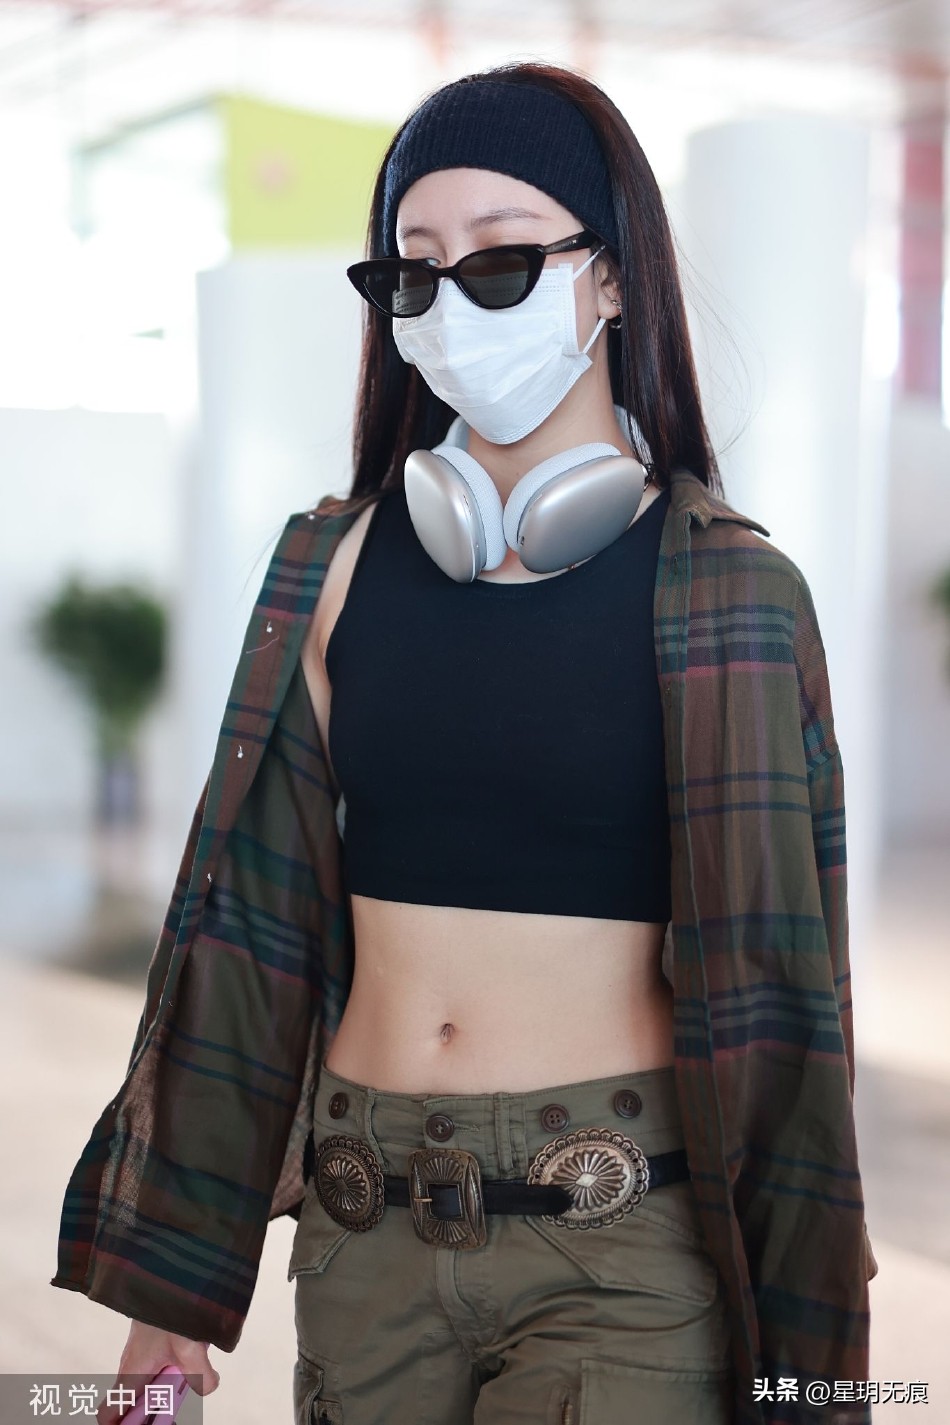 Song Yanfei showed up at the airport in a navel-baring outfit and ...